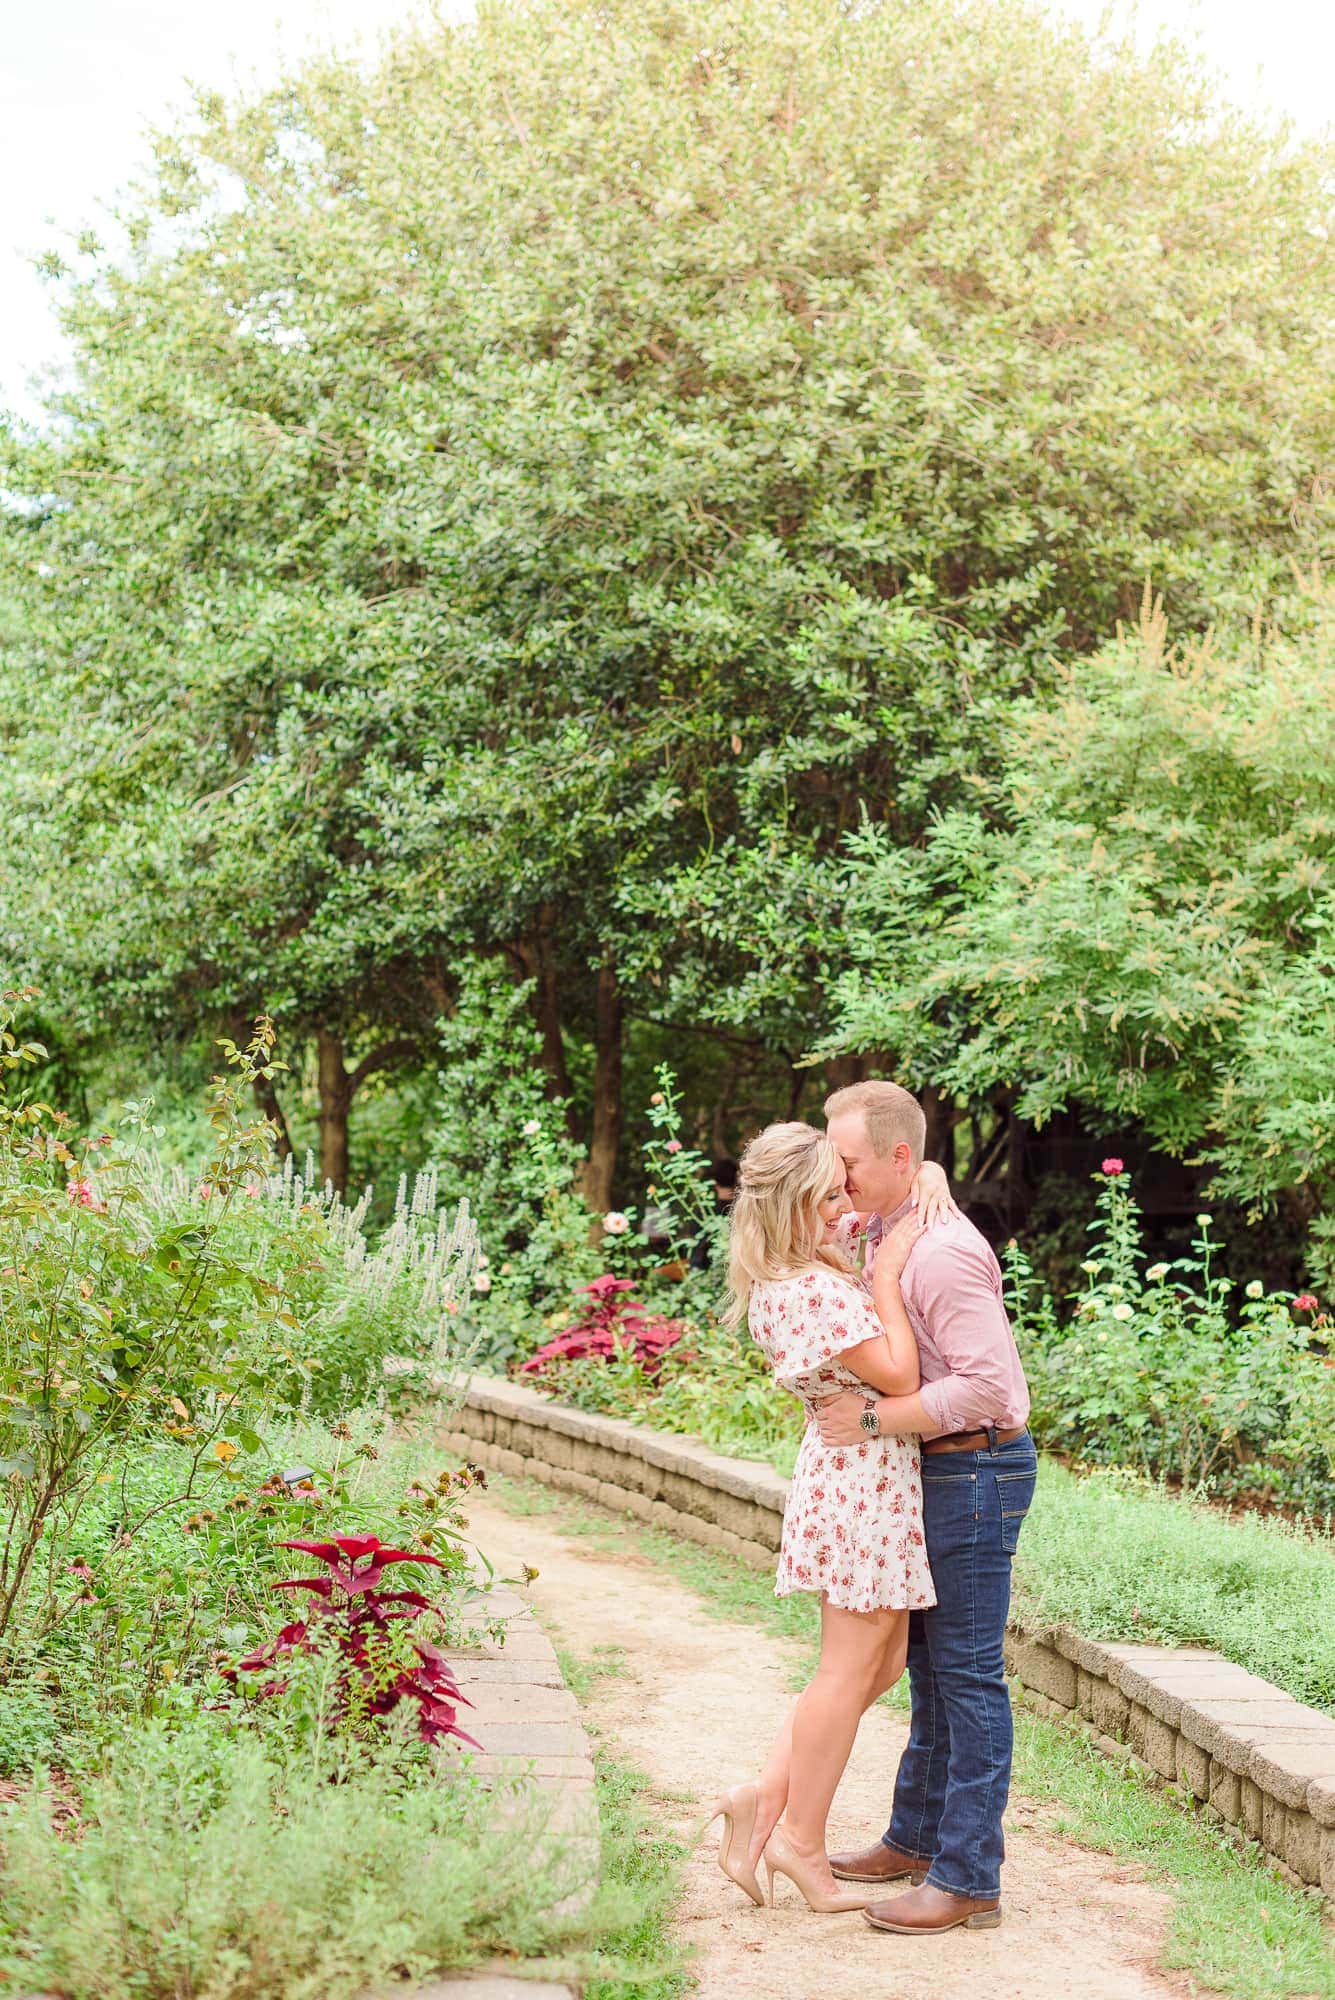 A gorgeous dirt path lined with flowers at this Charlotte Rose Garden.